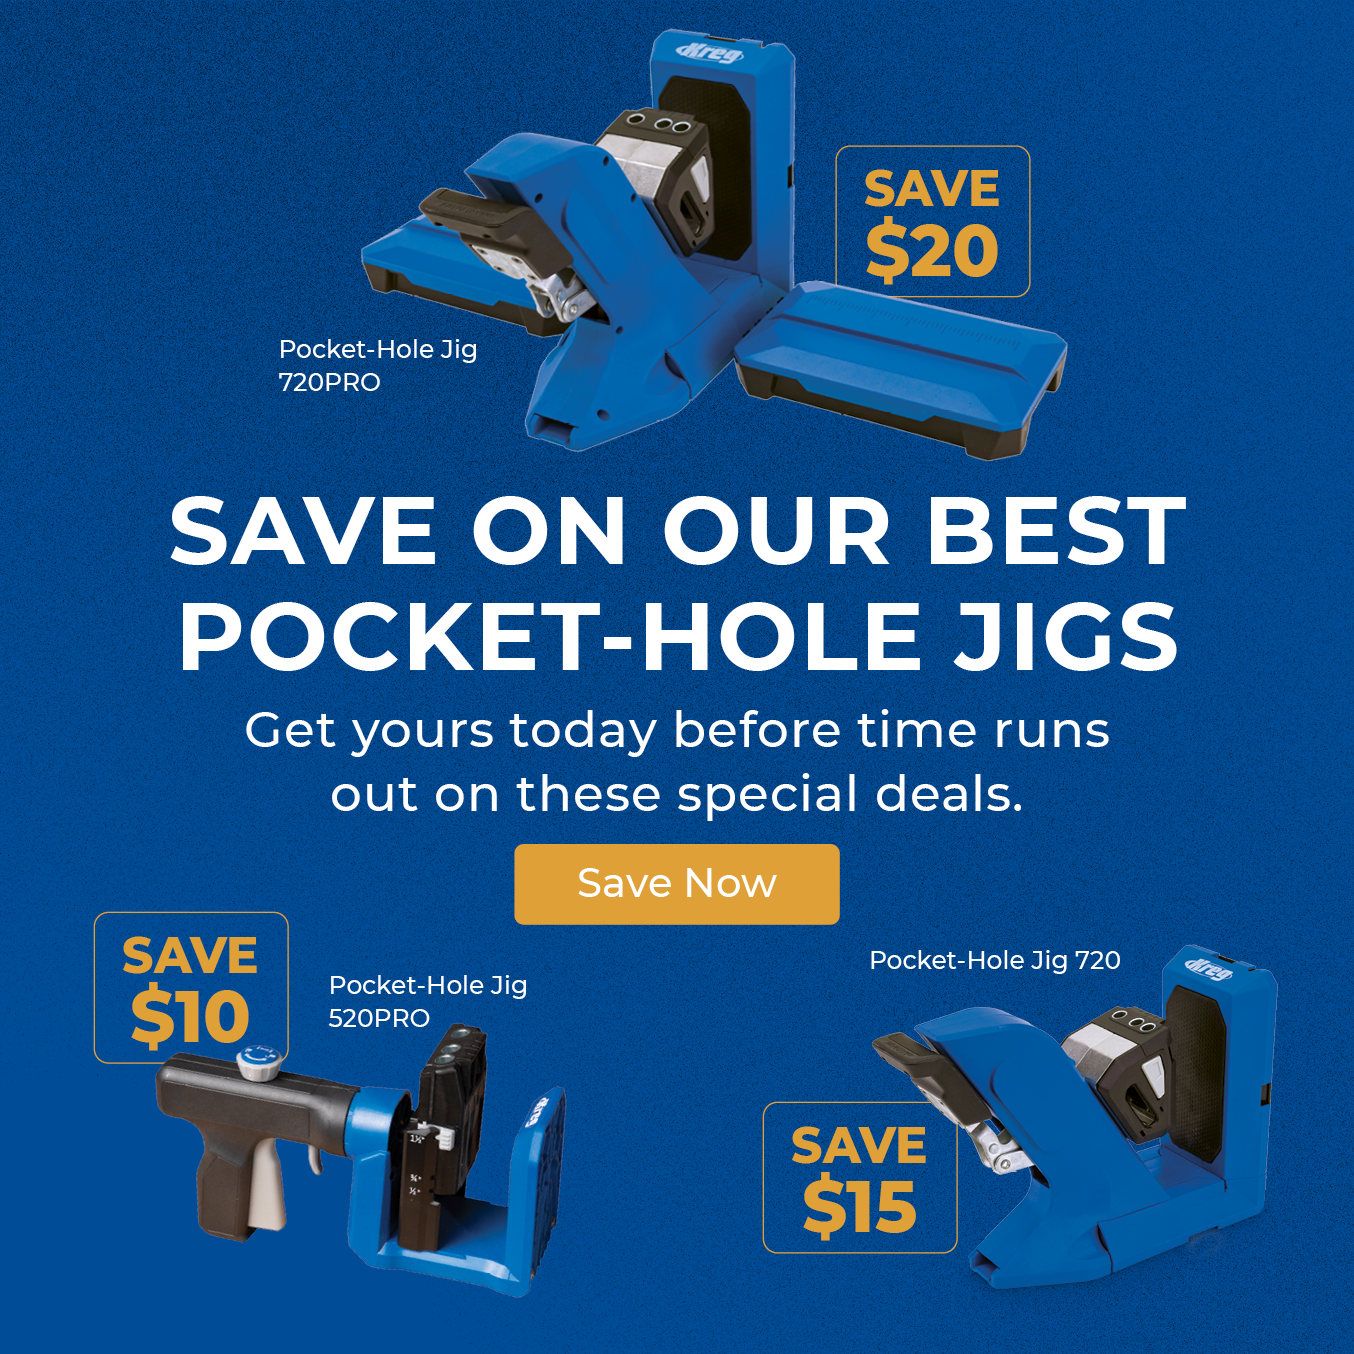 Save on our best pocket-hole jigs